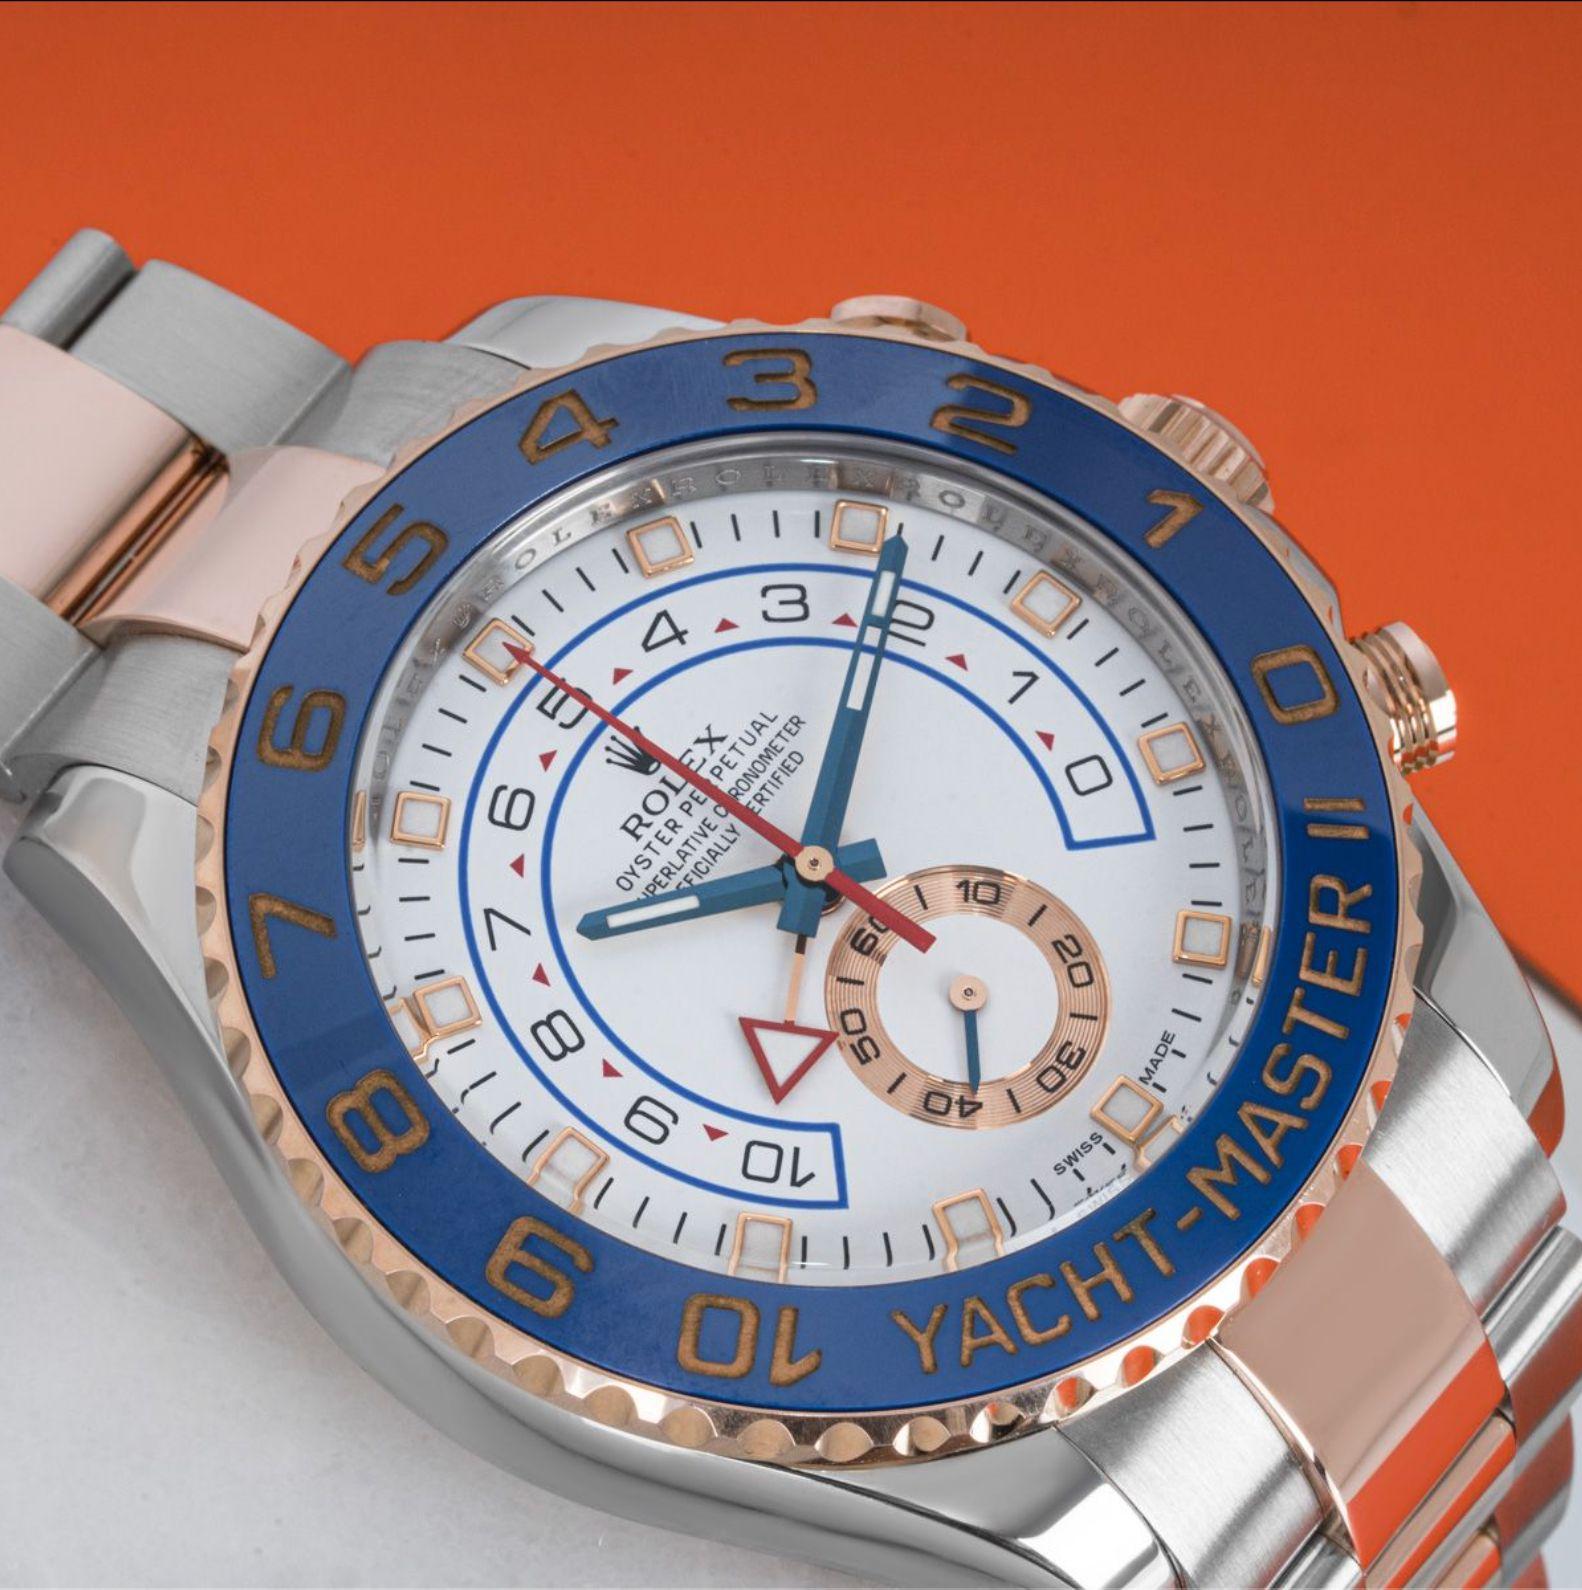 A Rolex Yacht-Master II in Oystersteel and rose gold. Featuring a white dial with a 10-minute countdown and a small seconds display. The rose gold bidirectional rotatable ring command bezel features a blue ceramic insert with numerals coated in